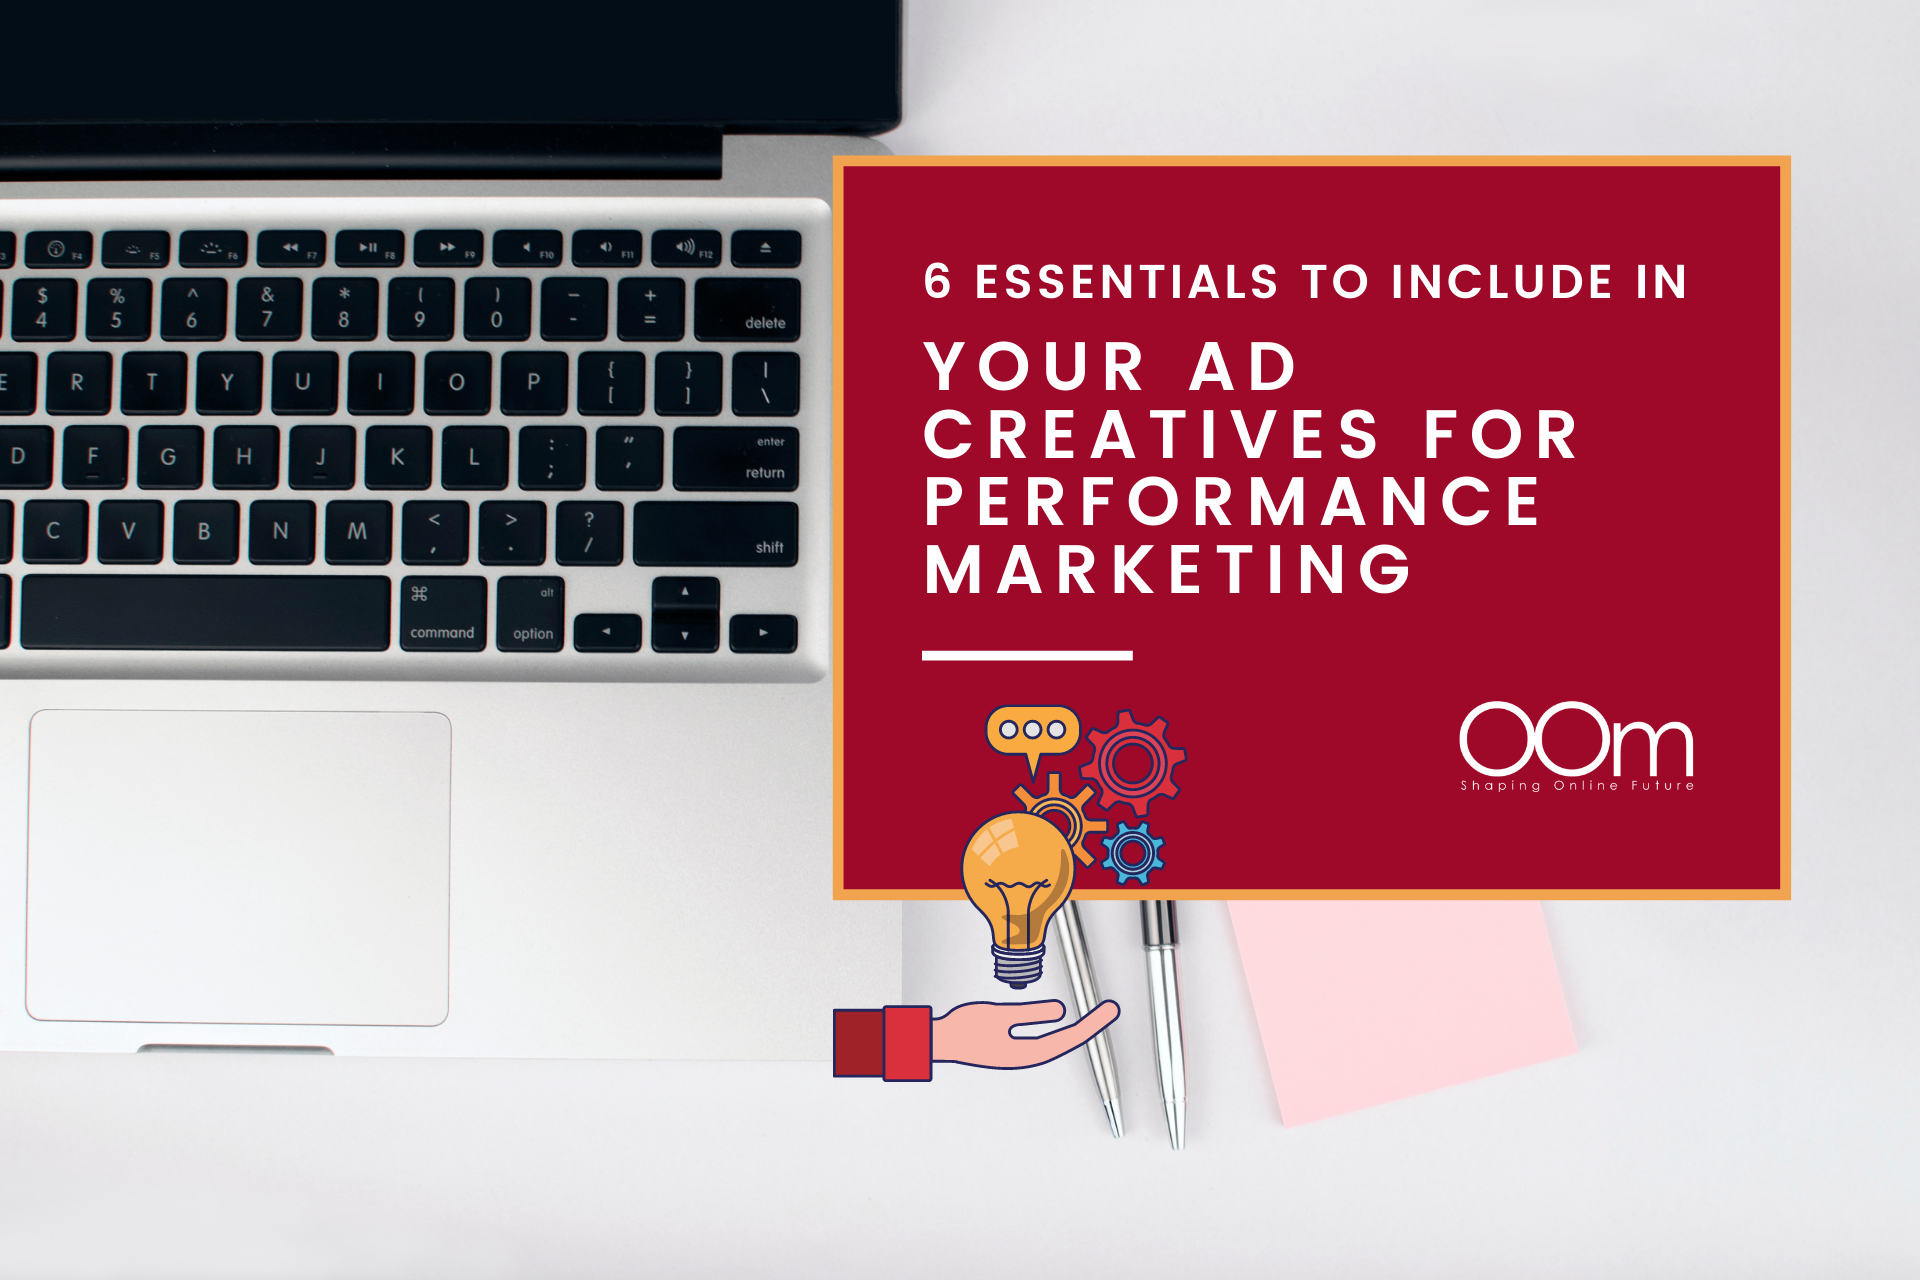 6 Essentials To Include In Your Ad Creatives For Performance Marketing